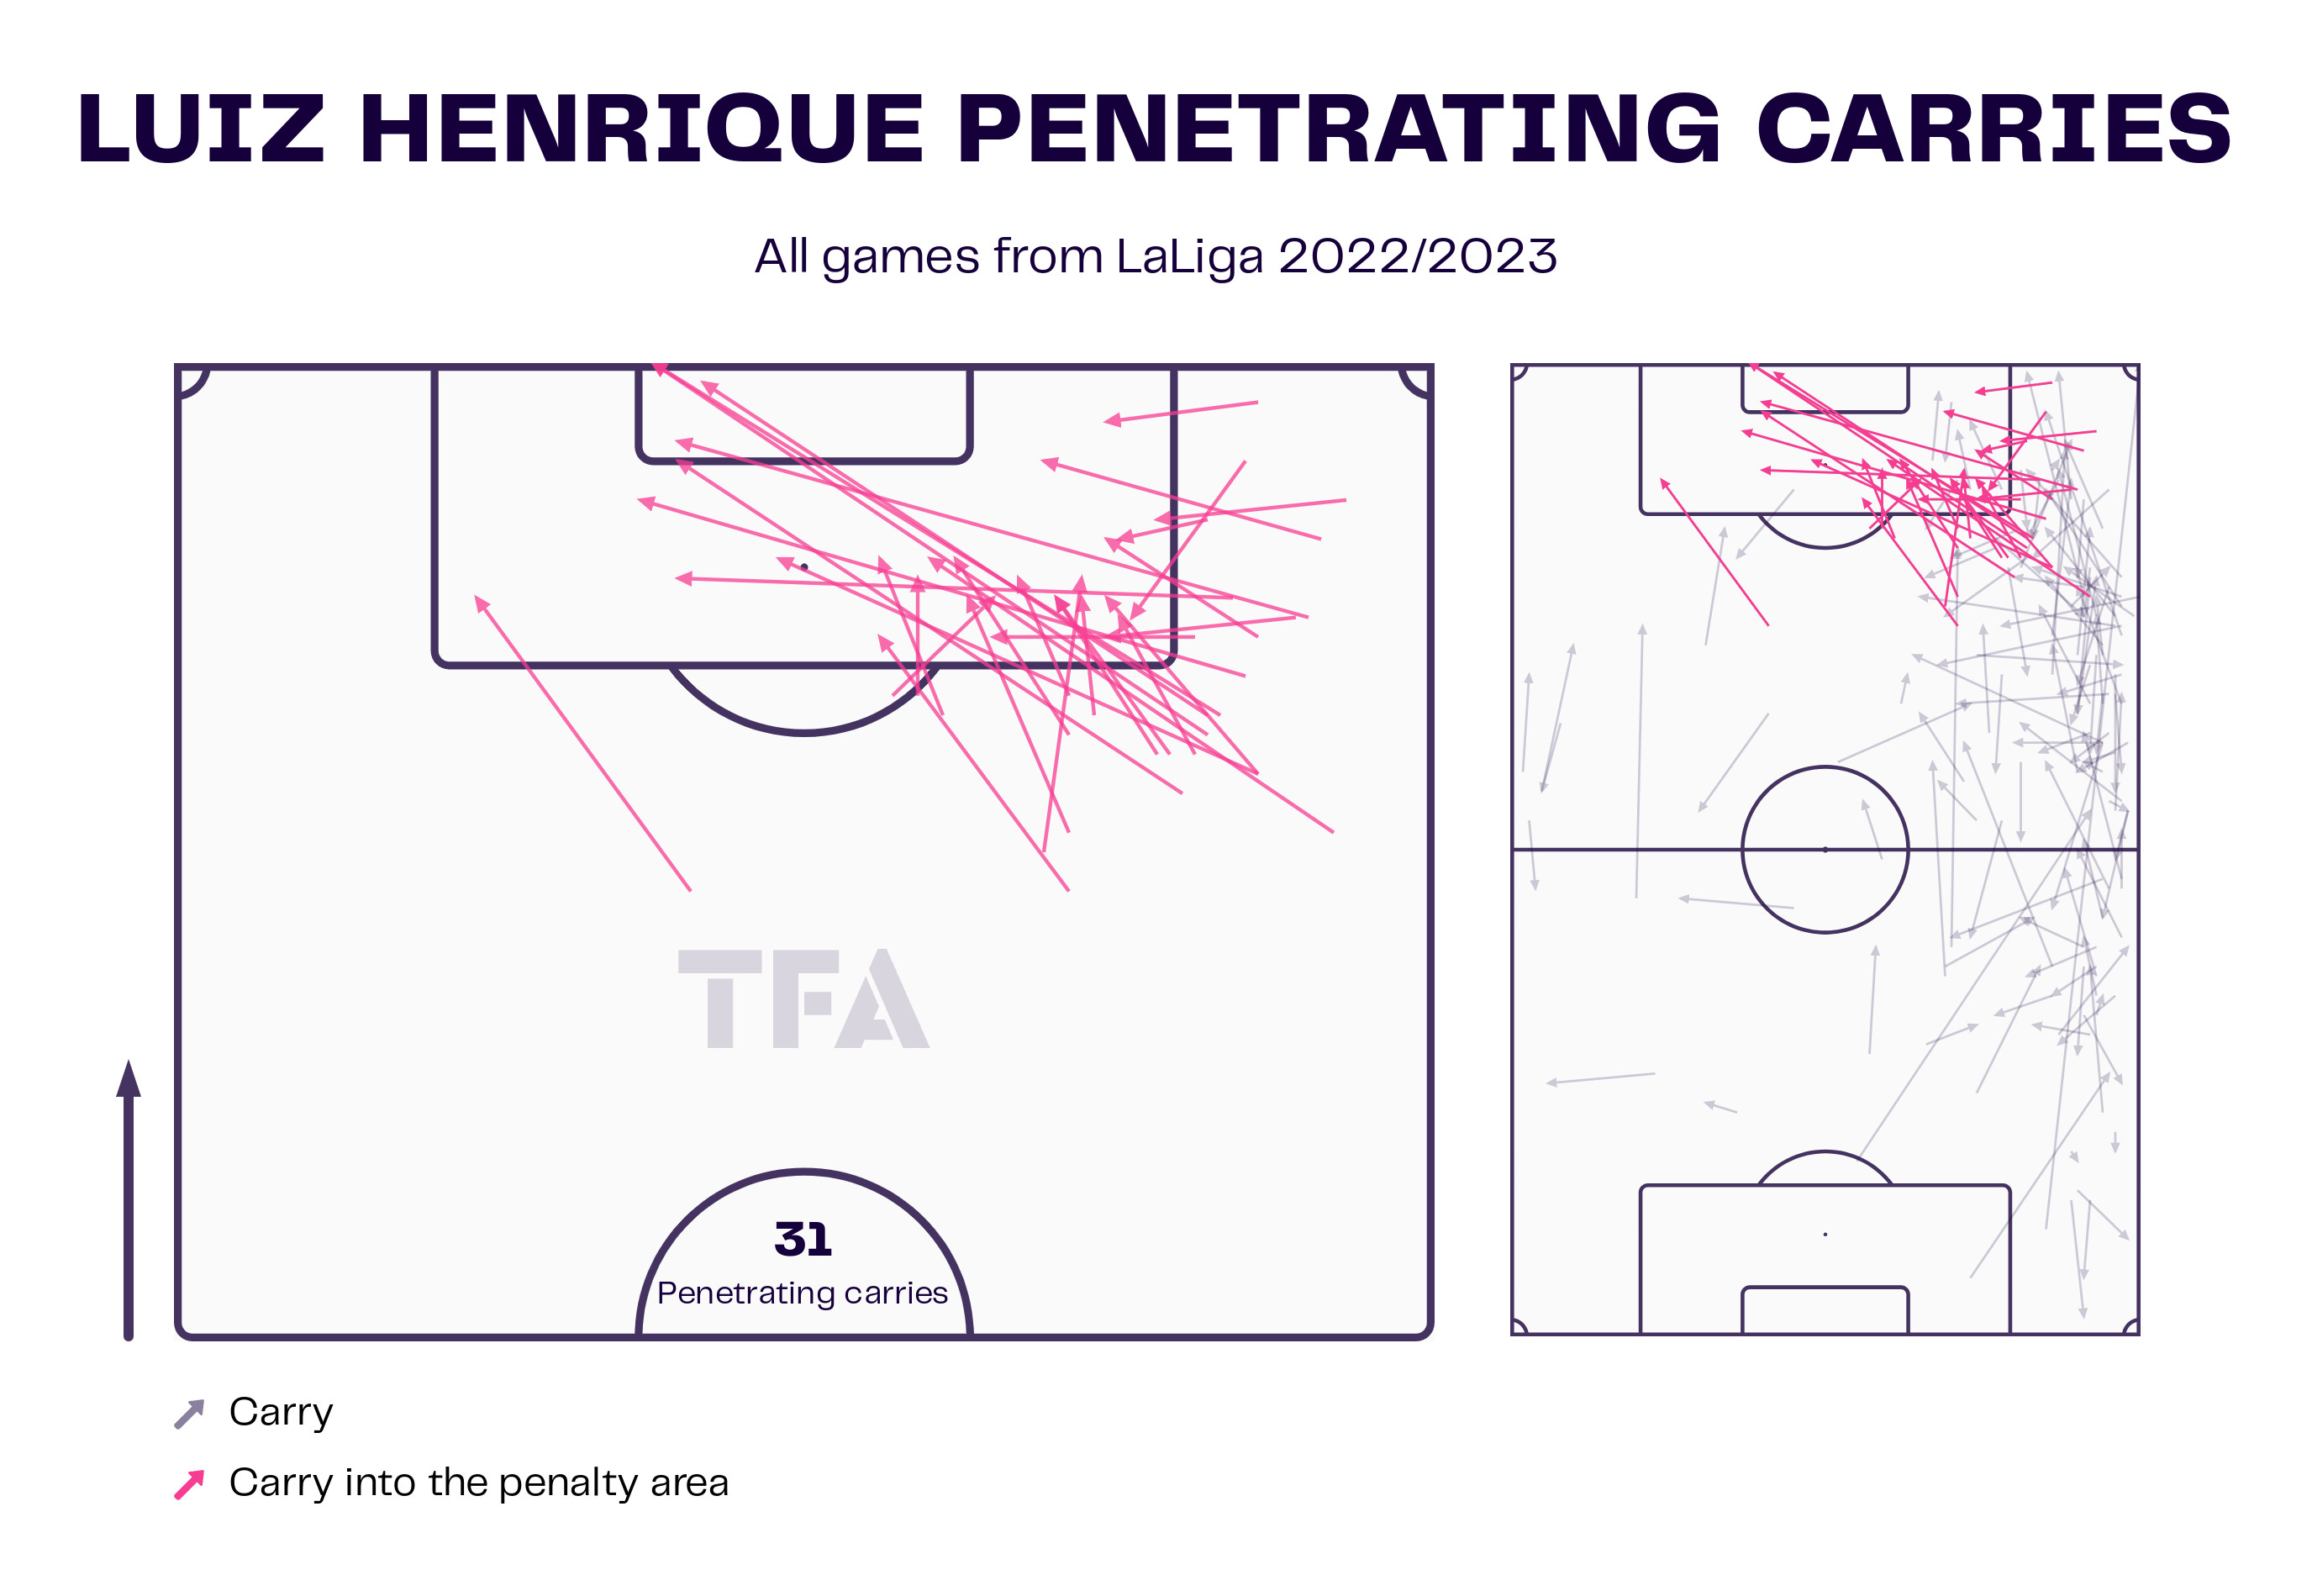 Luis Henrique - Real Betis: data, statistics, analysis and scouting report